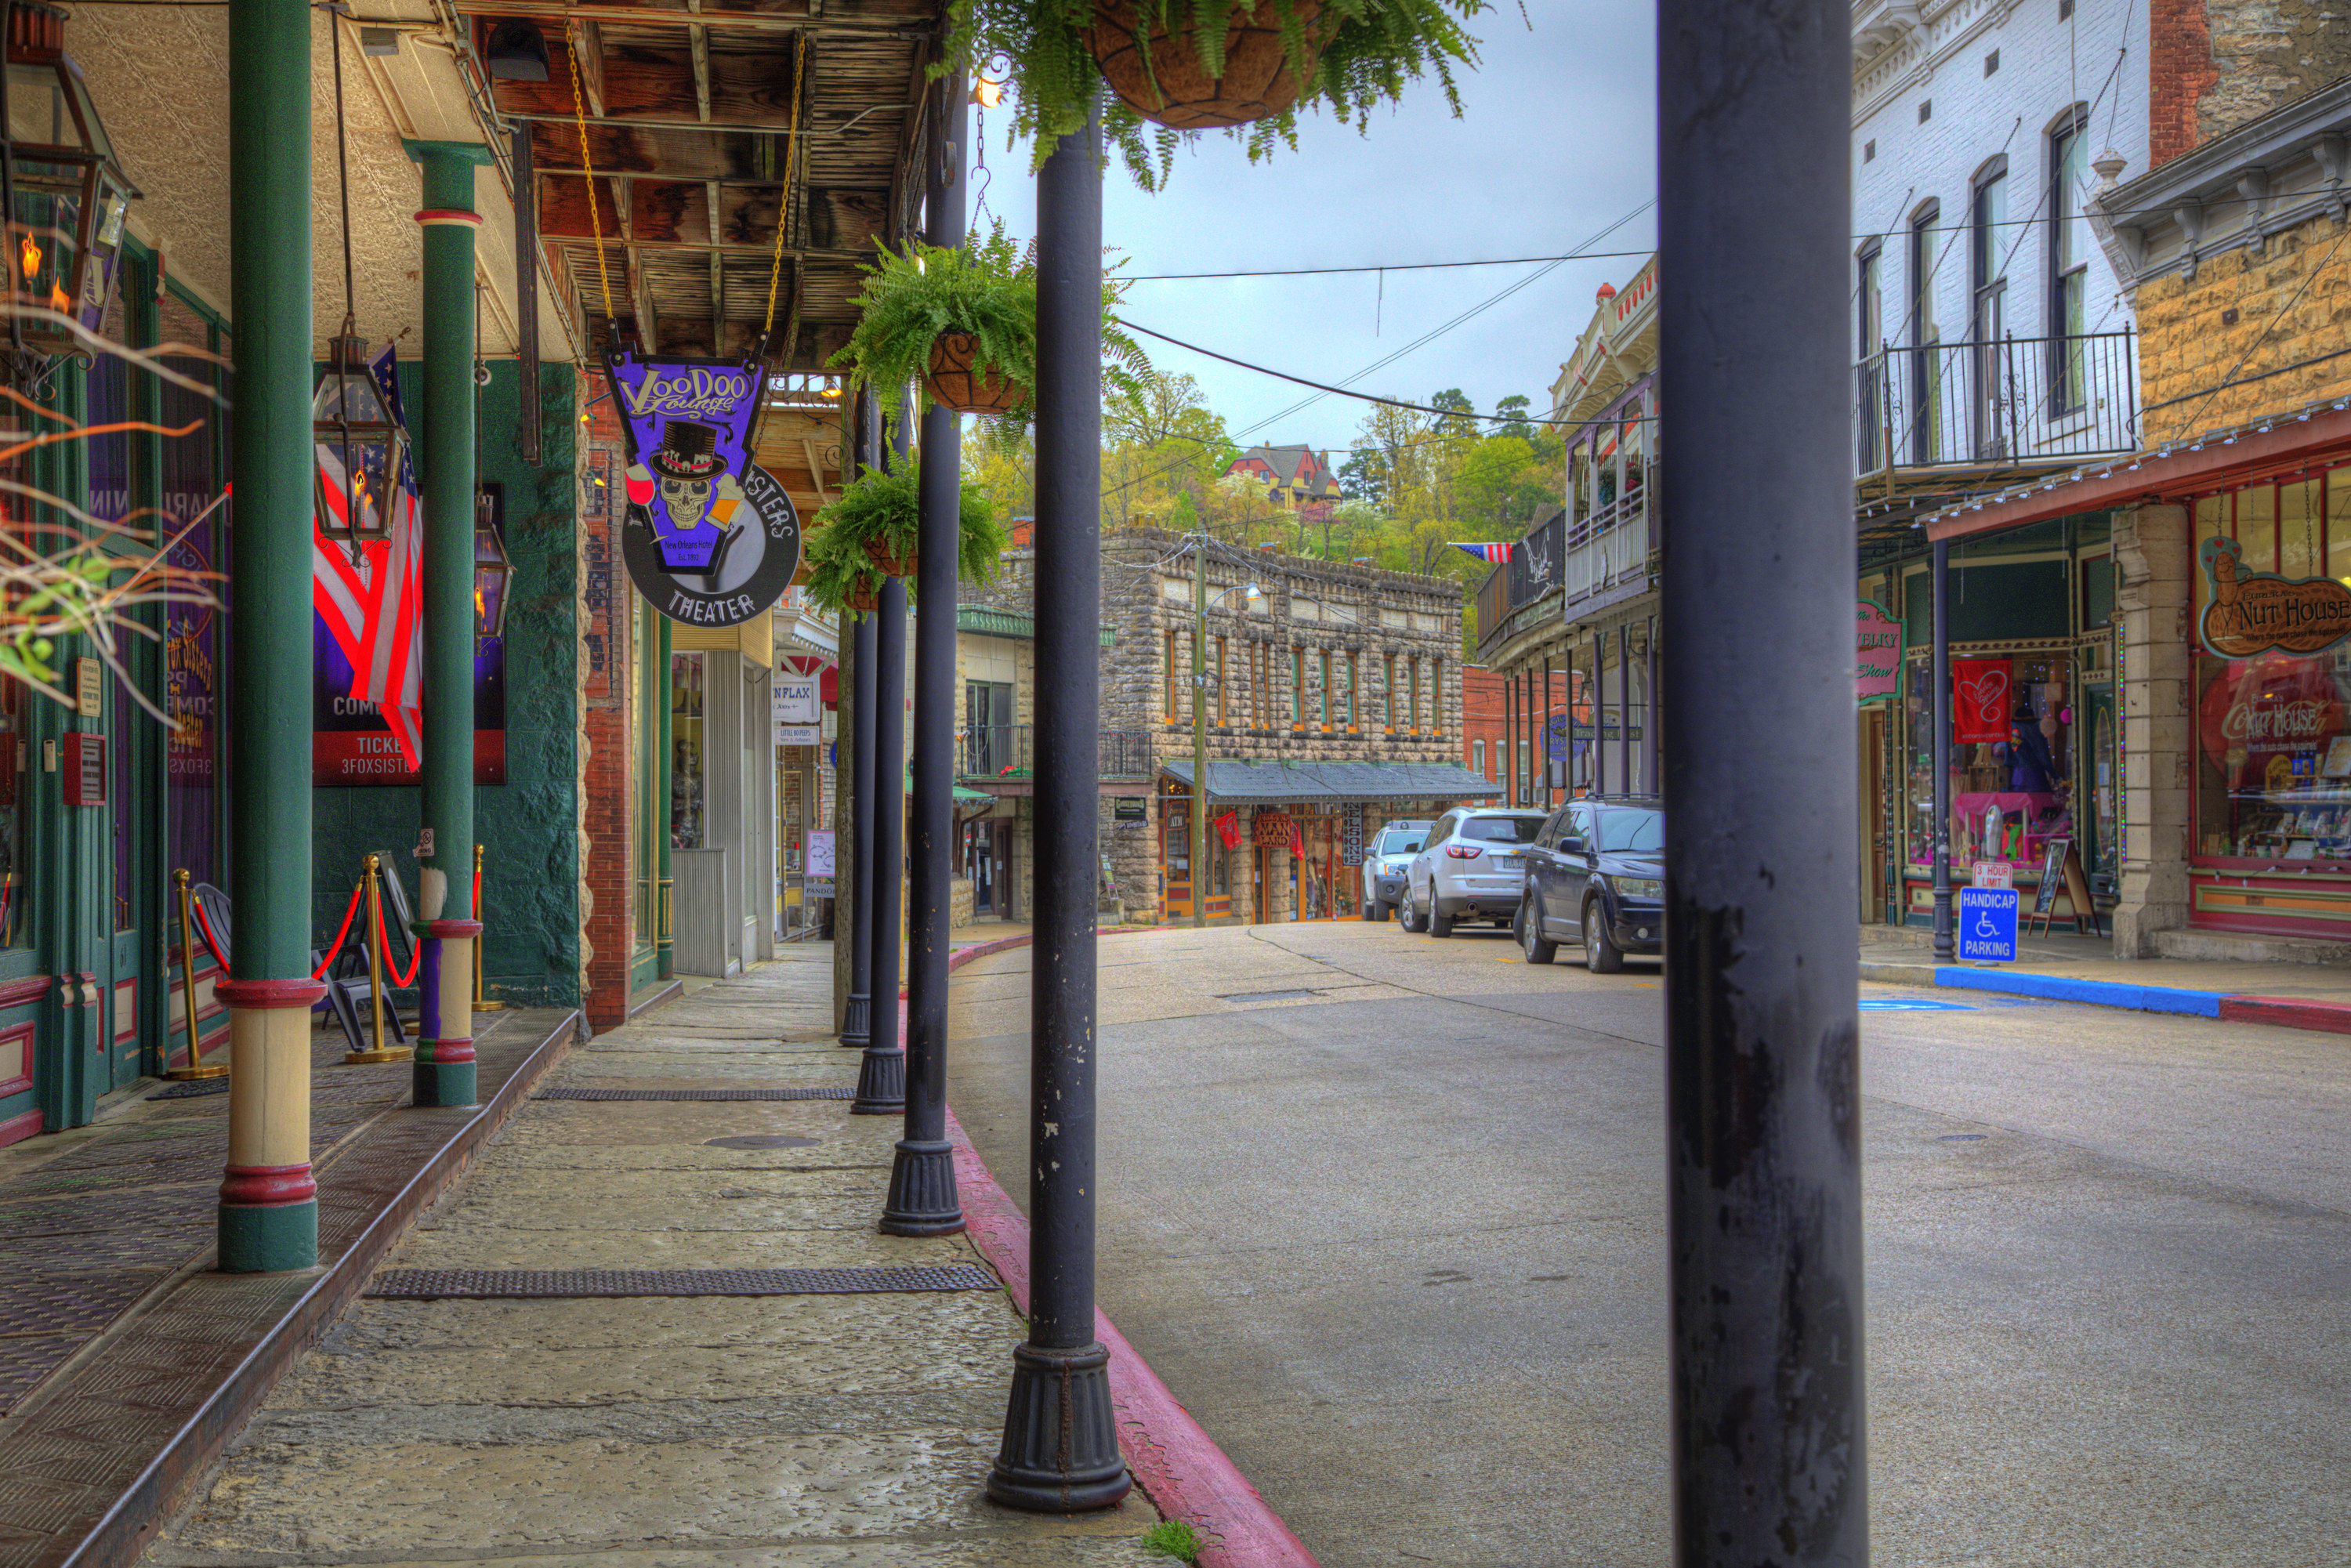 A street in Eureka Springs lined with various shops. One of the signs that says &quot;VooDoo&quot; above a storefront features a skull in a top hat